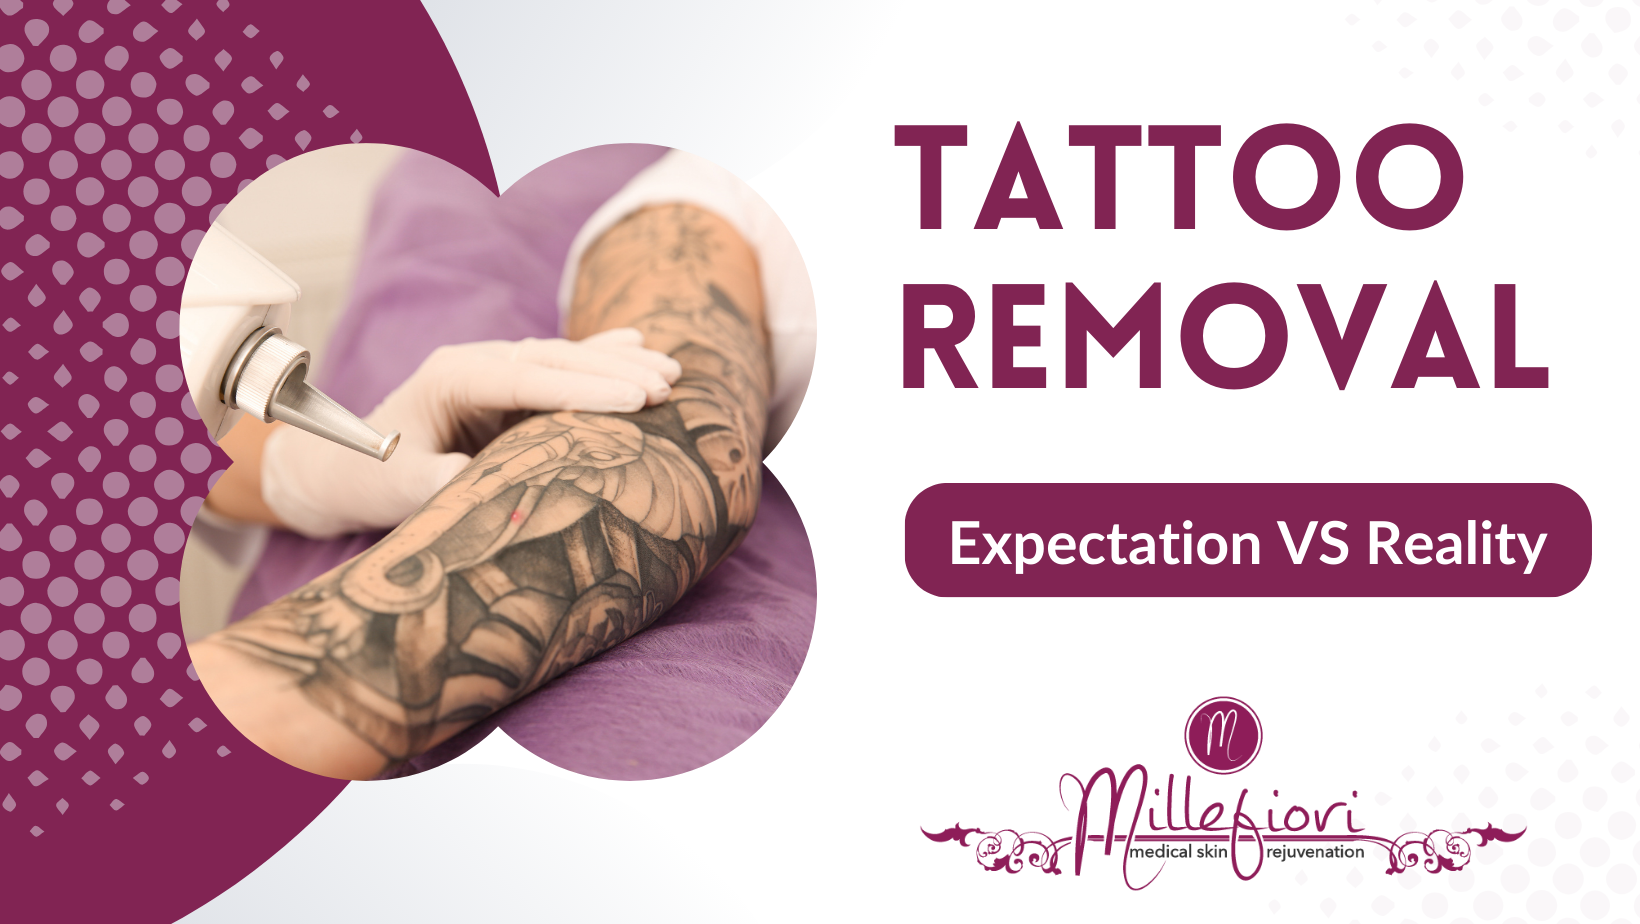 Tattoo Removal Options Are Not All the Same